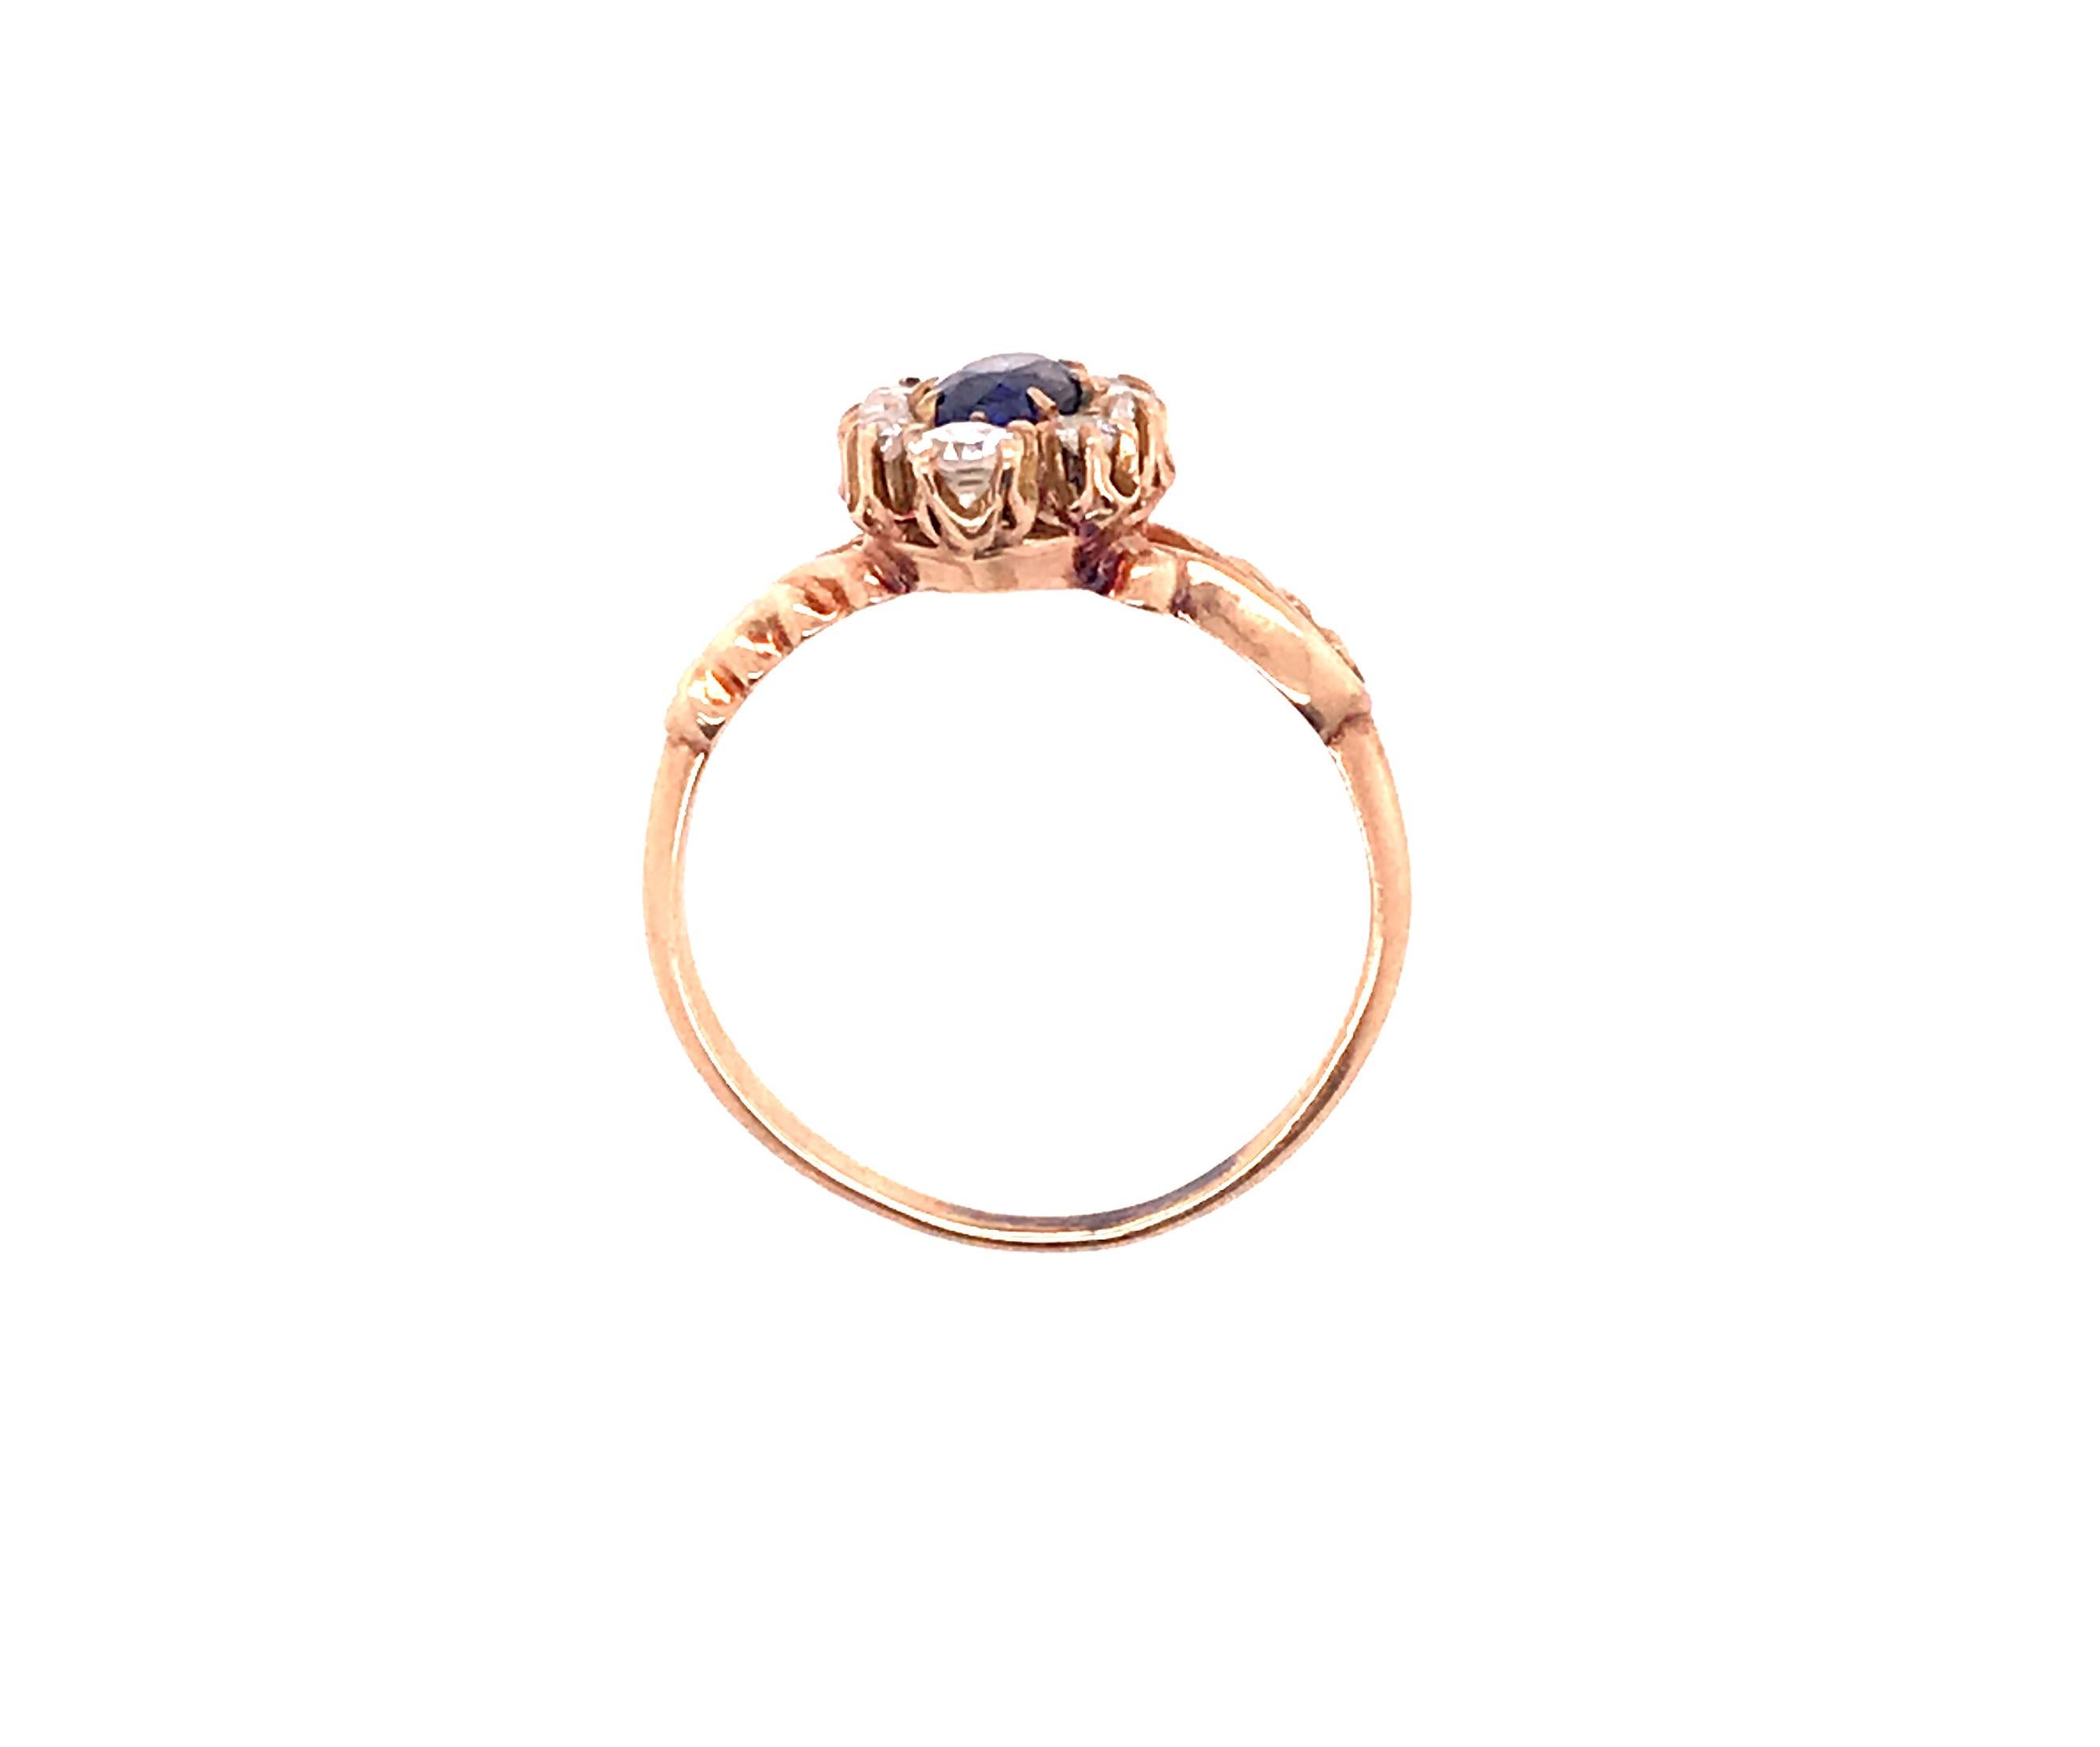 Vintage Edwardian Sapphire Diamond Engagement Ring 1.10 Carat Oval 14K Yellow Gold



Featuring a .78ct Genuine Natural Blue Oval Sapphire Center

Bright Oval Sapphire Radiates Rich Royal Blue Hues 

Enticed with Twinkling Rose Cut and Two Large